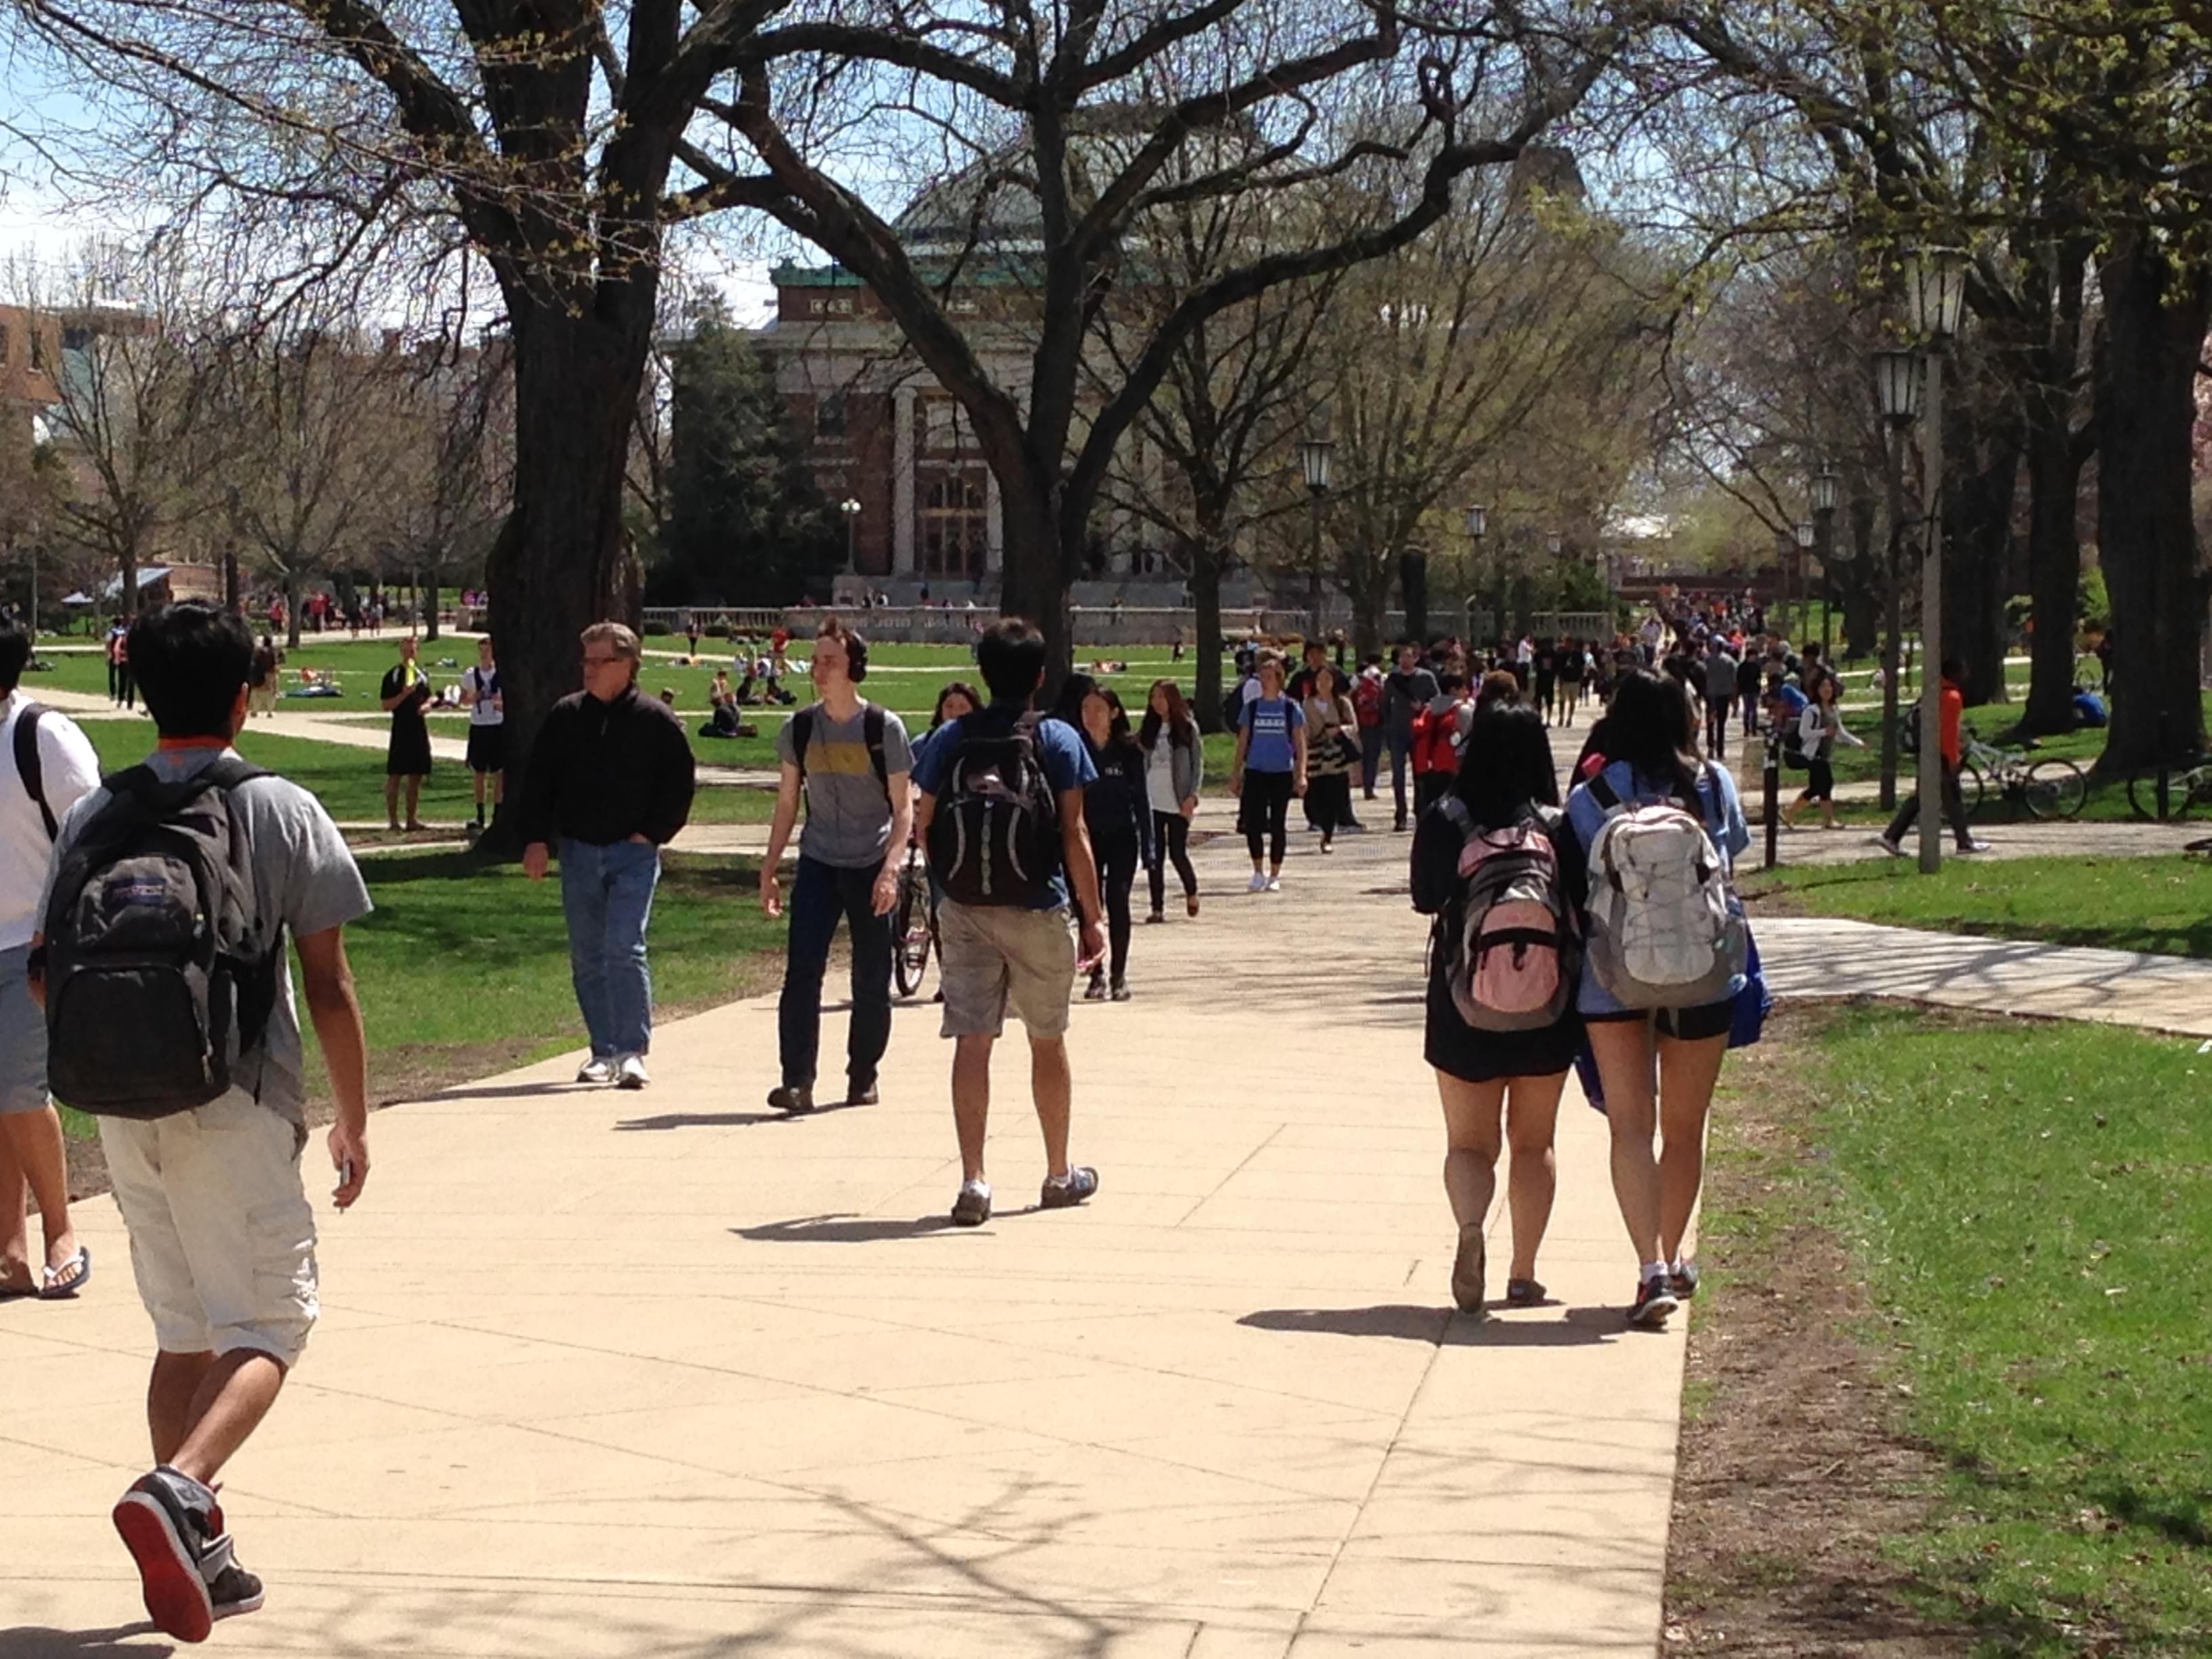 Students at the University of Illinois at Urbana-Champaign on April 25, 2014.